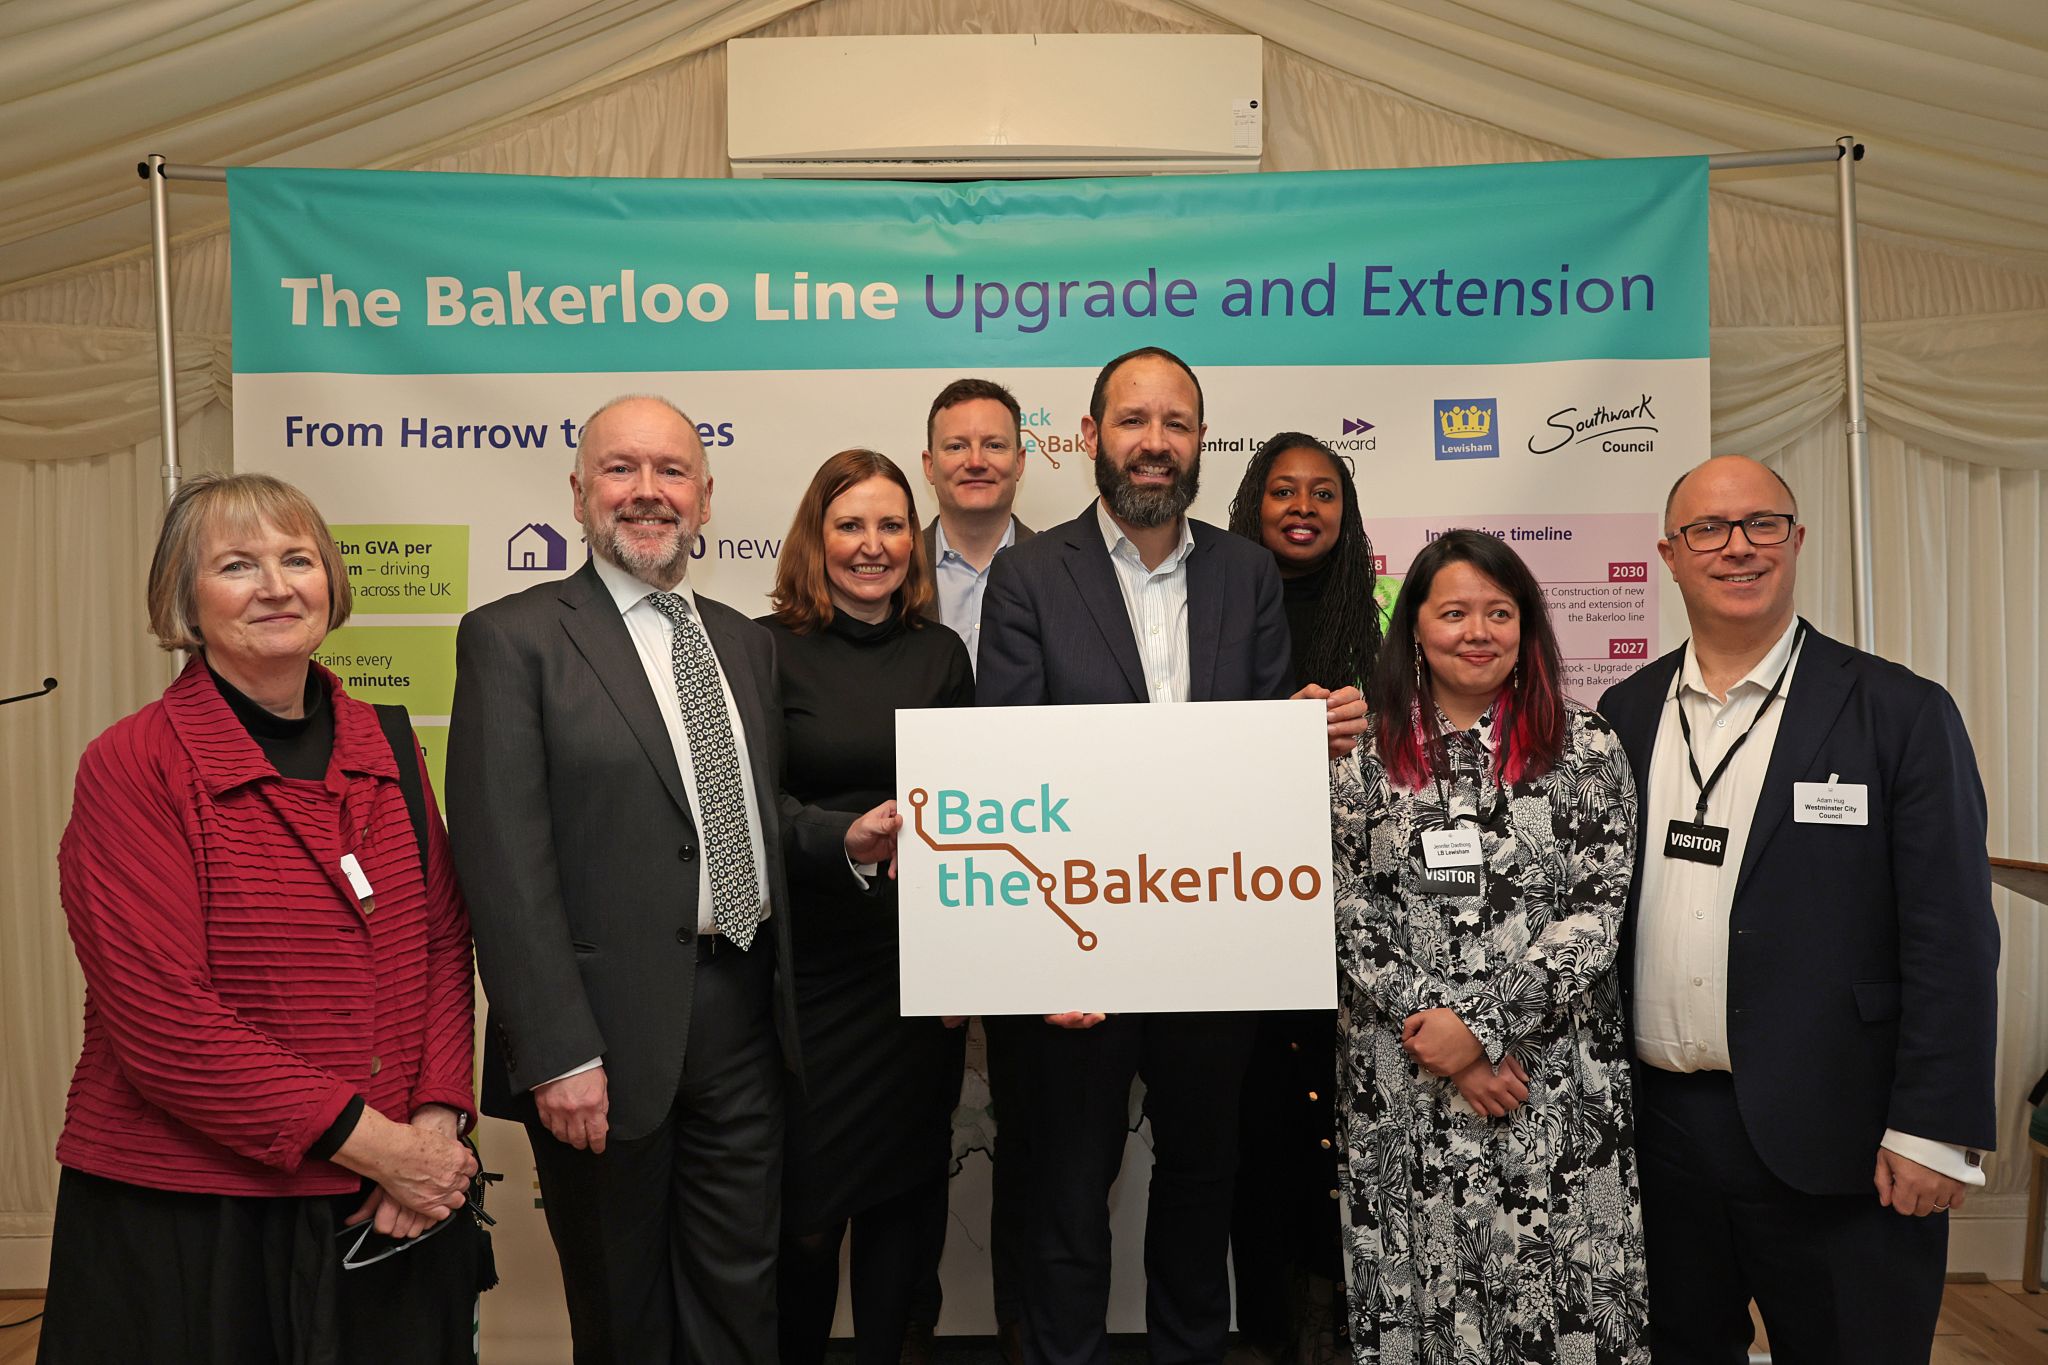 Back the Bakerloo Launch, Parliament, 5 March 2024. Featuring: Harriet Harman MP, John Dickie, Vicky Foxcroft MP, Seb Dance, Deputy Mayor of London, Cllr Kieron Williams, Leader of Southwark Council, Dawn Butler MP, Jennifer Daothong, Chief Executive of Lewisham Council and Adam Hug, Leader of Westminster Council.